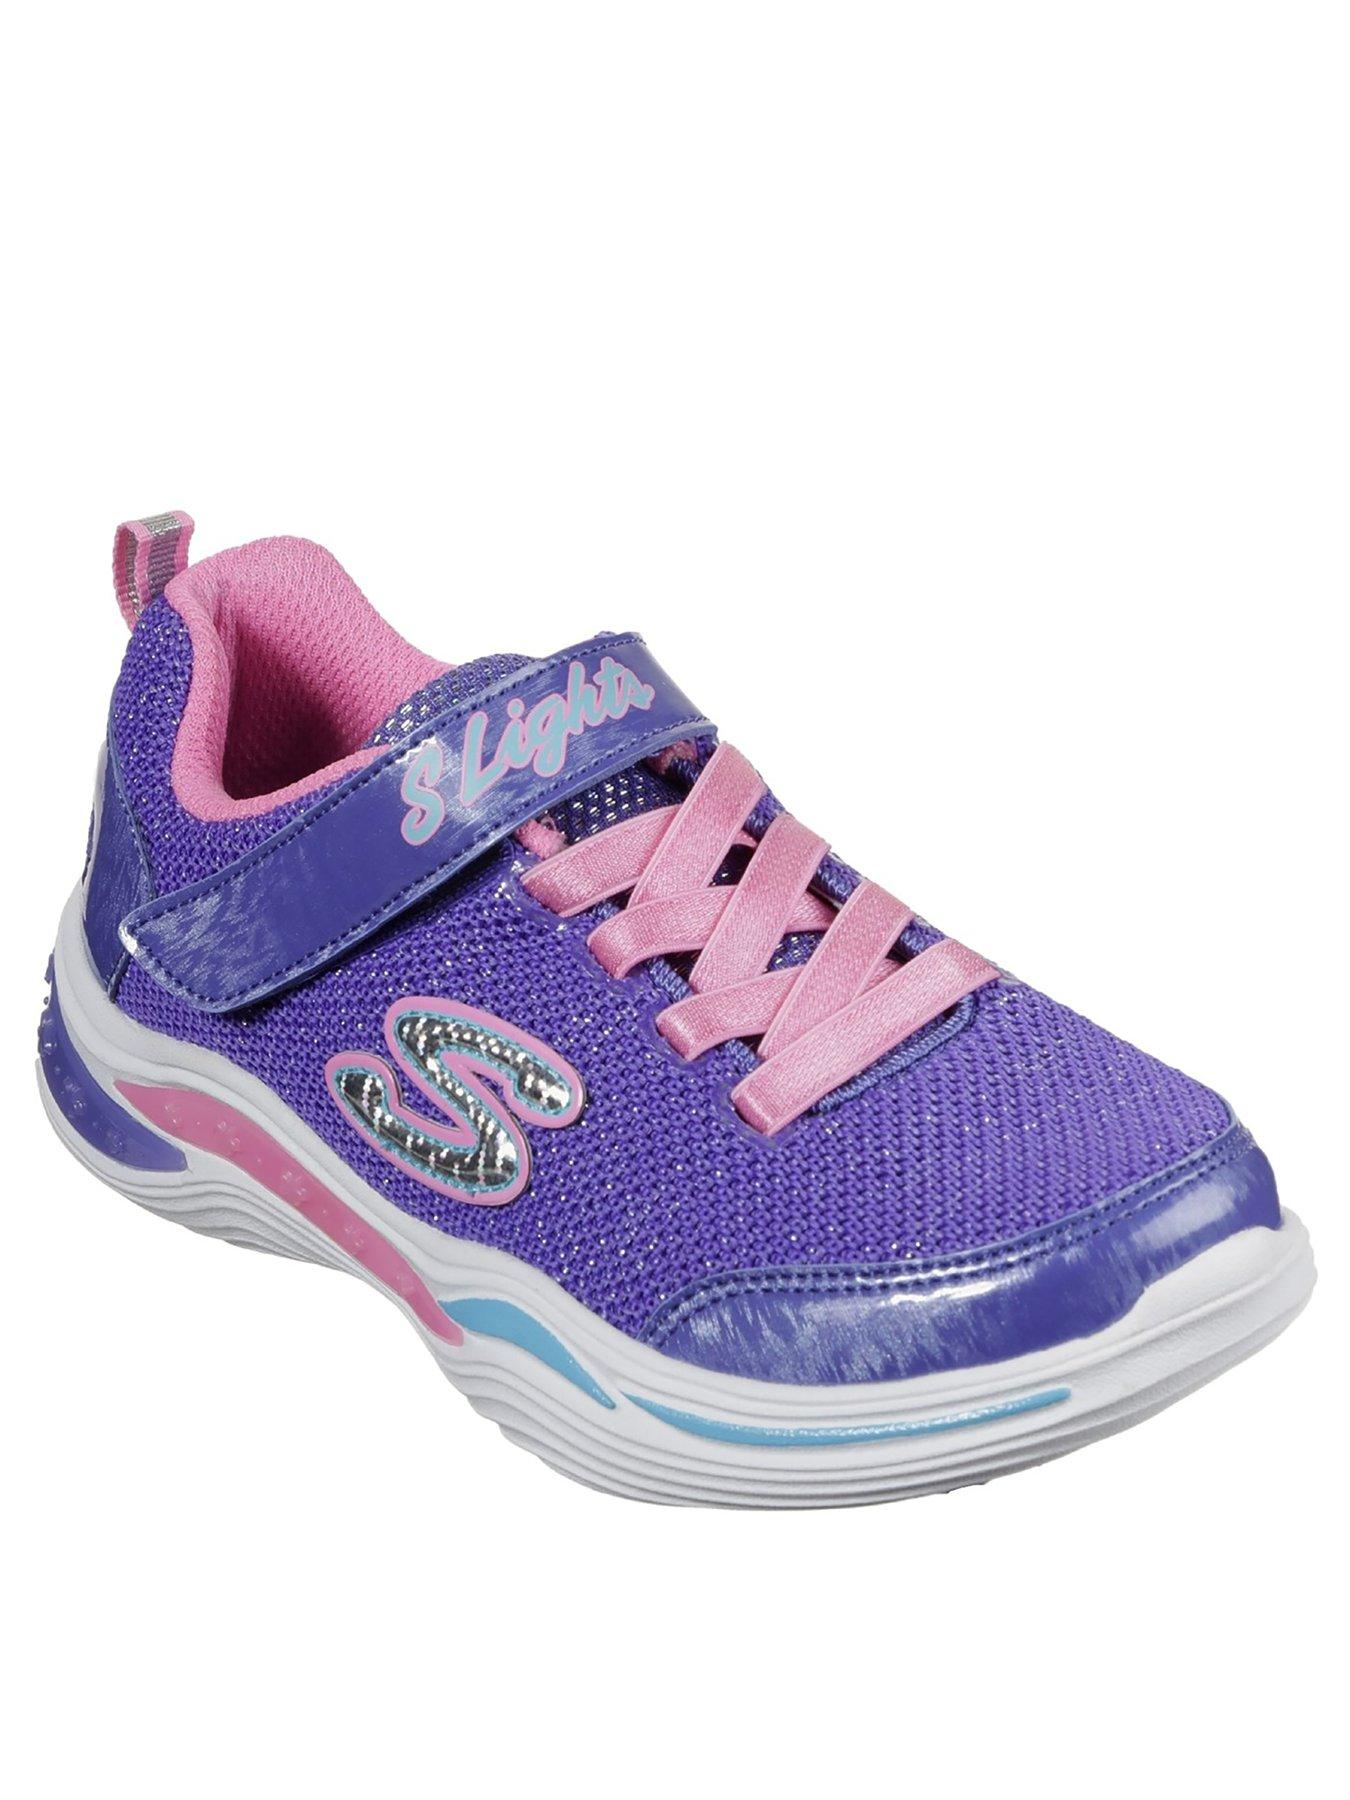 girls trainers size 1.5